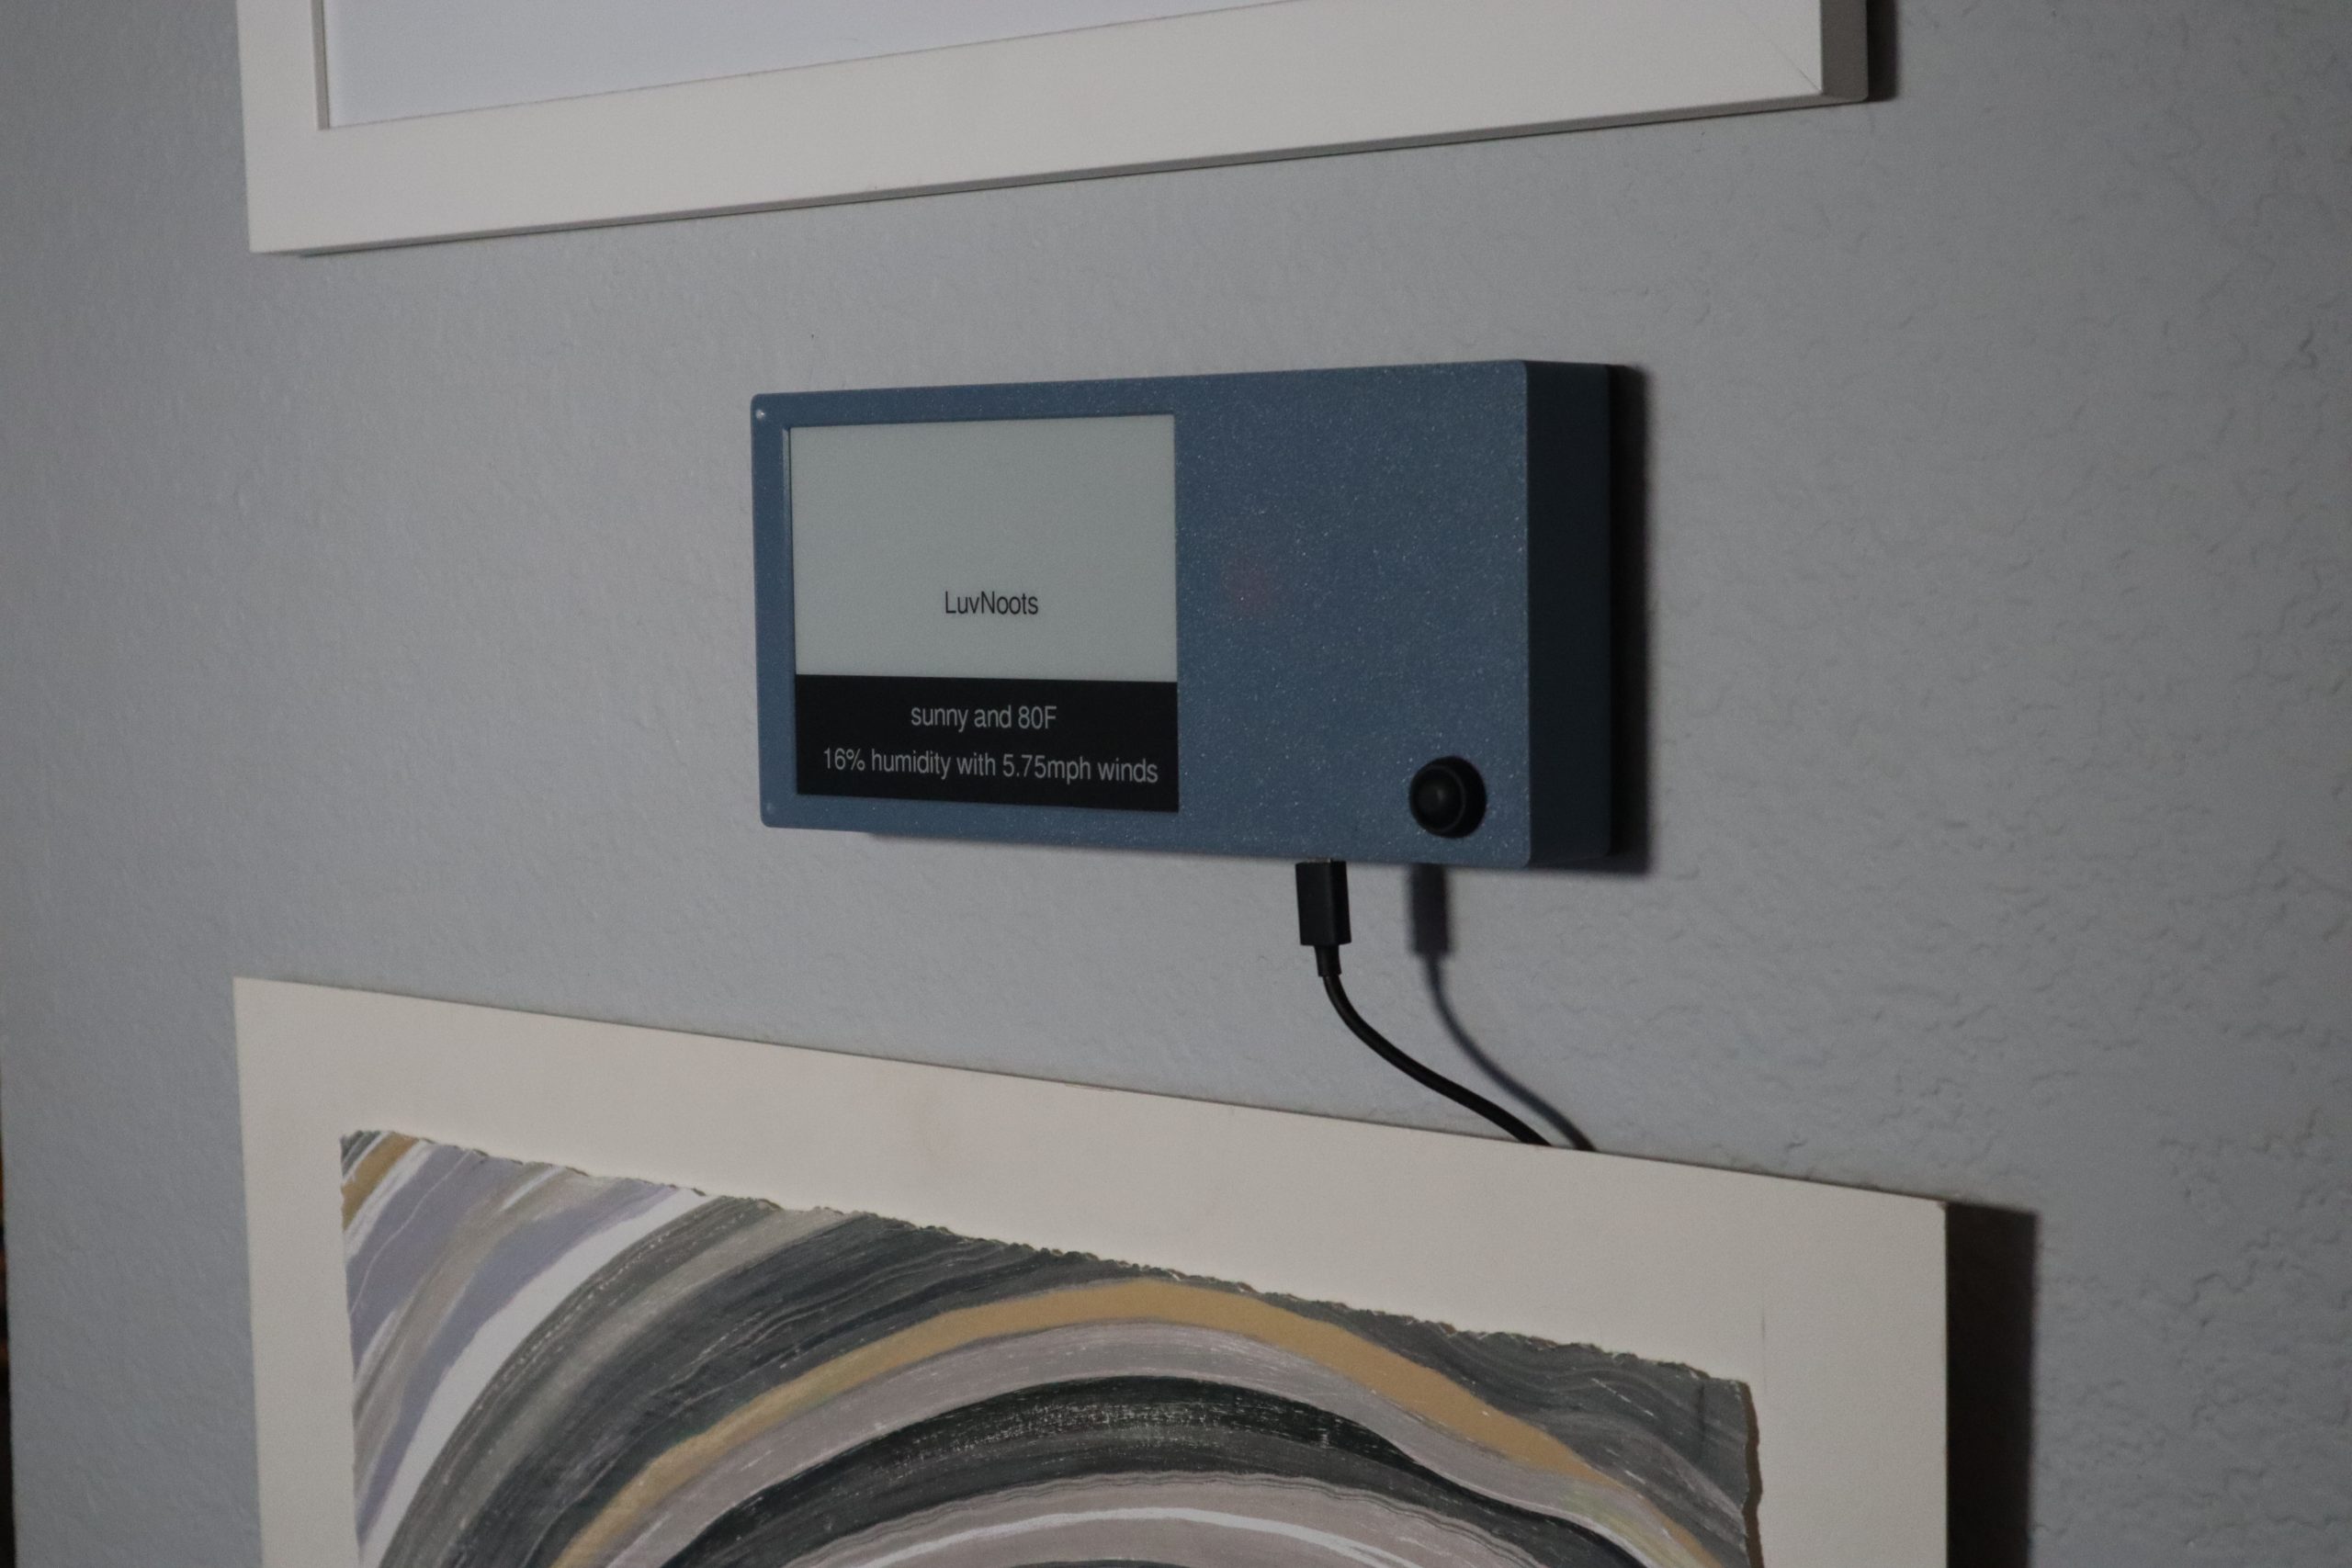 LuvNoots: Wall-Mounted ePaper SMS Display